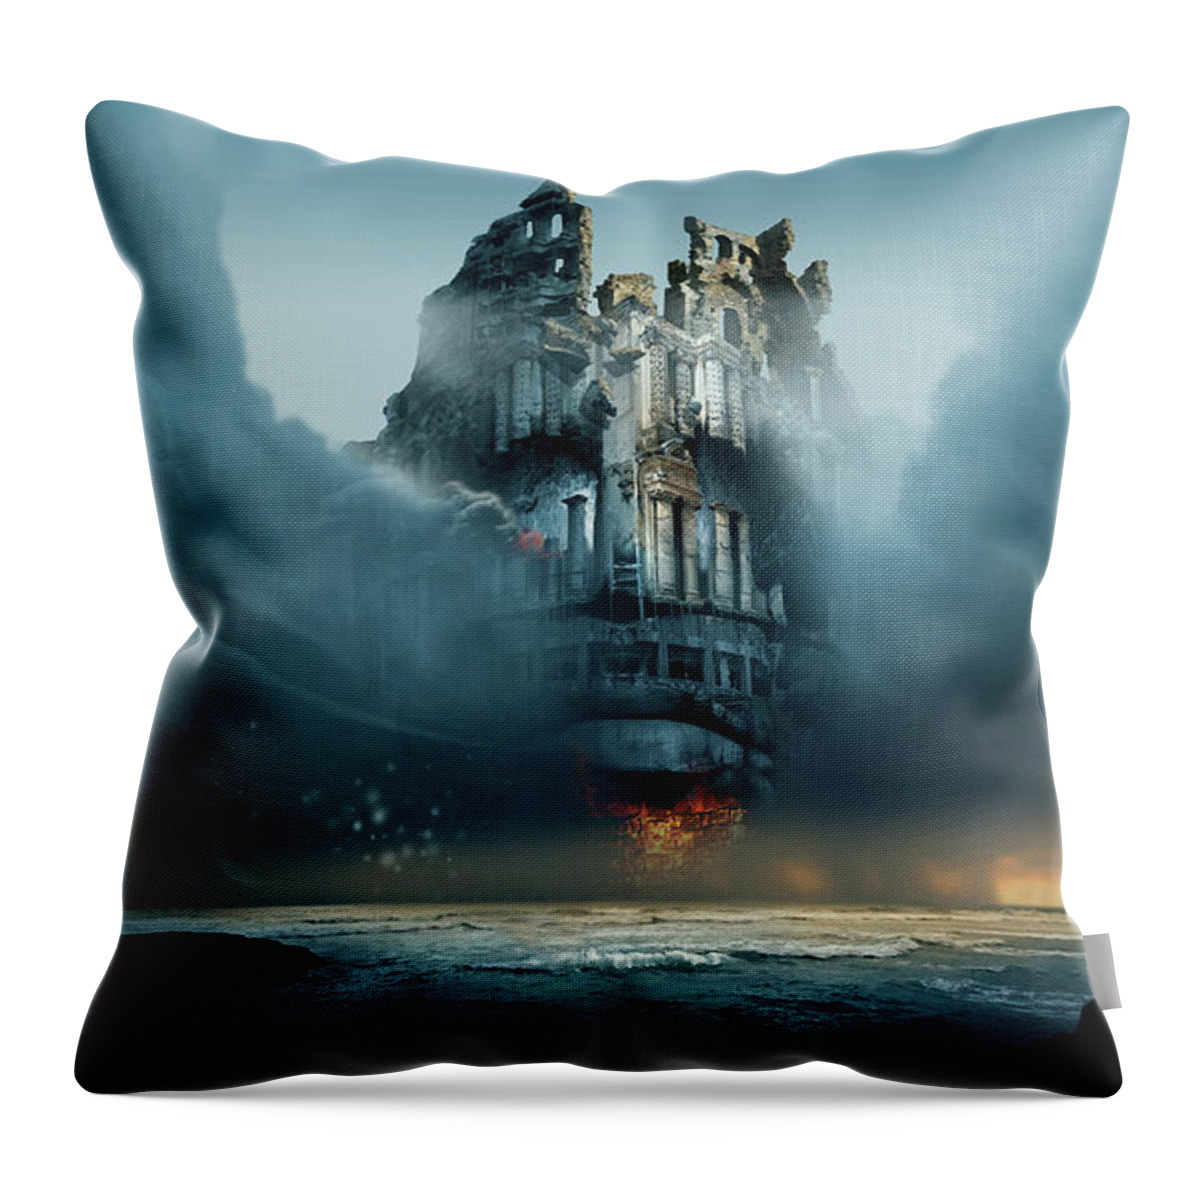 Dark Landscape Mystical Dangerous Phantasmagoria Digital Poster Limited Edition Giclee Art Print Metaphorical Allegorical Symbolic Throw Pillow featuring the digital art Along Ruined Soul by George Grie